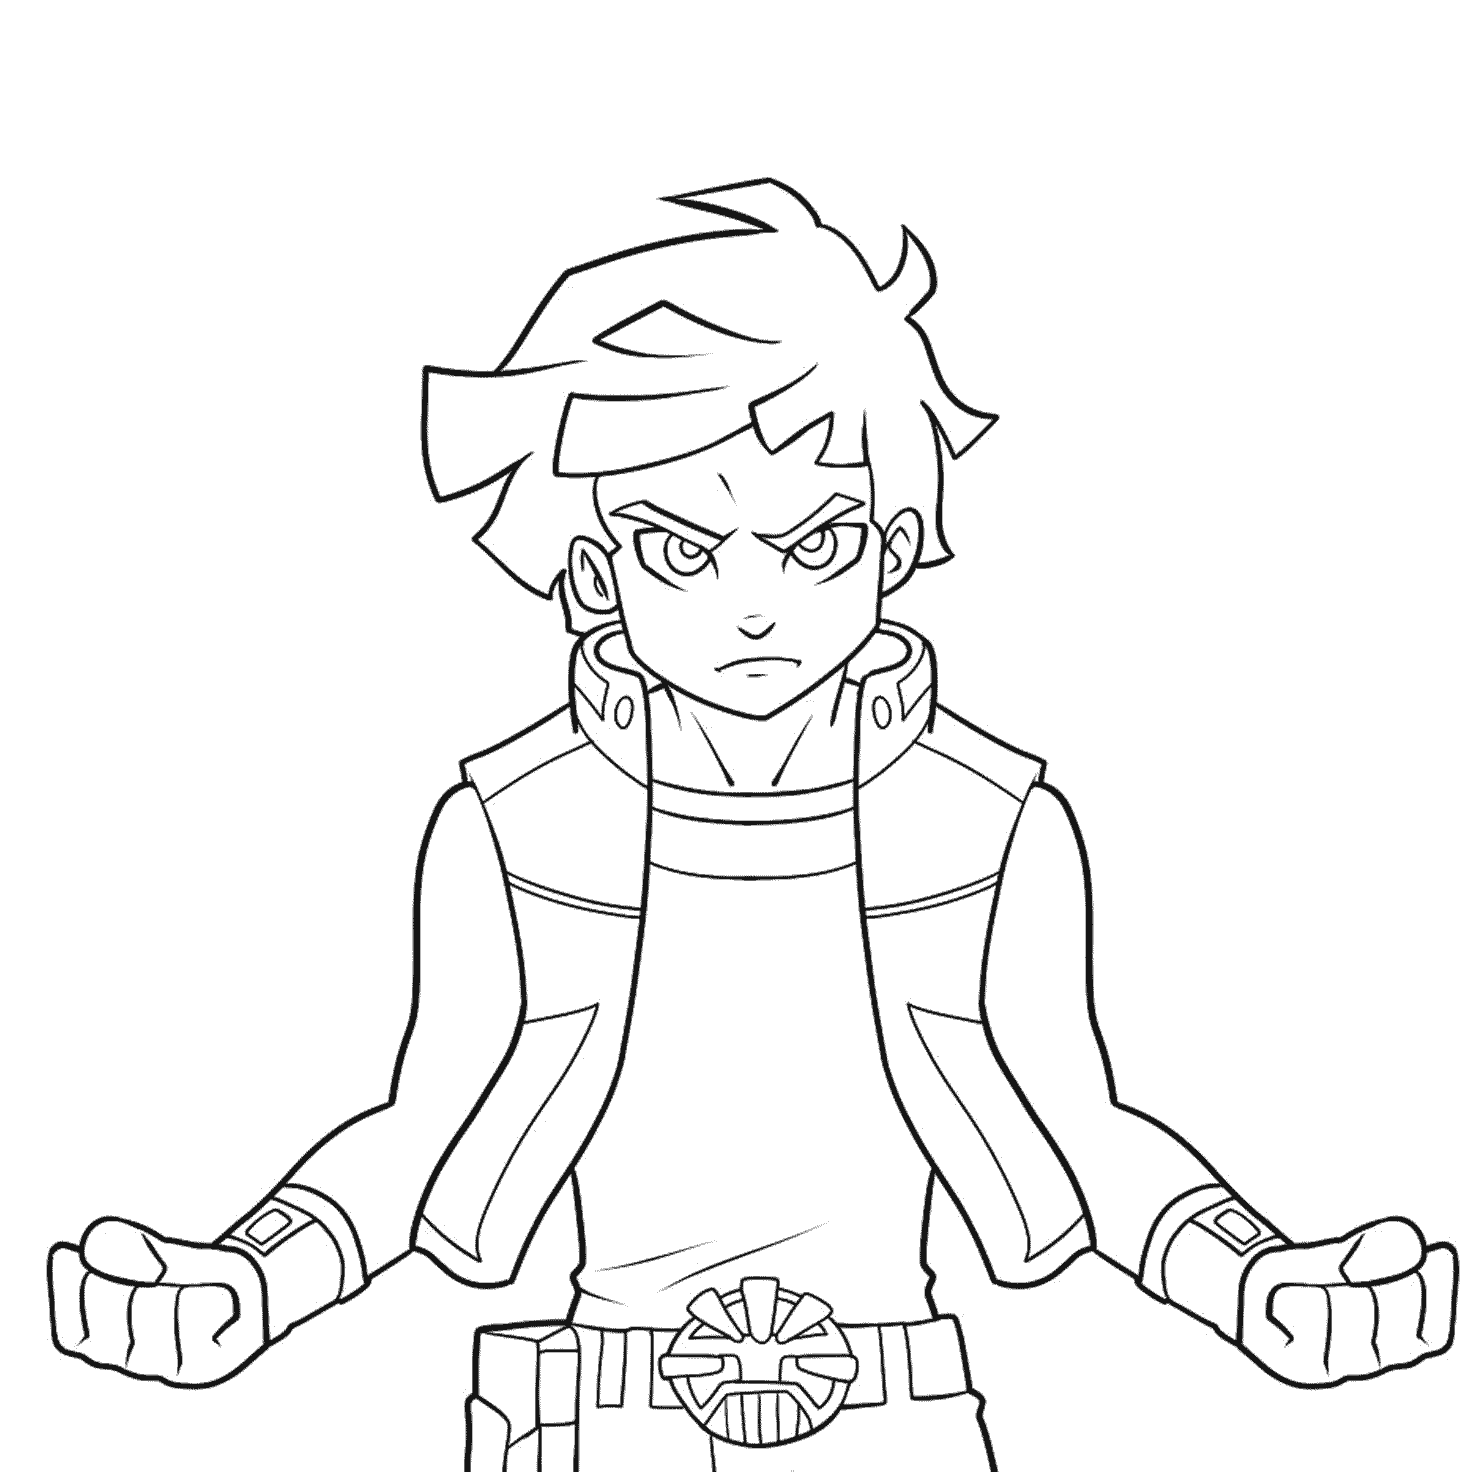 Rough Anime Guy Coloring Pages